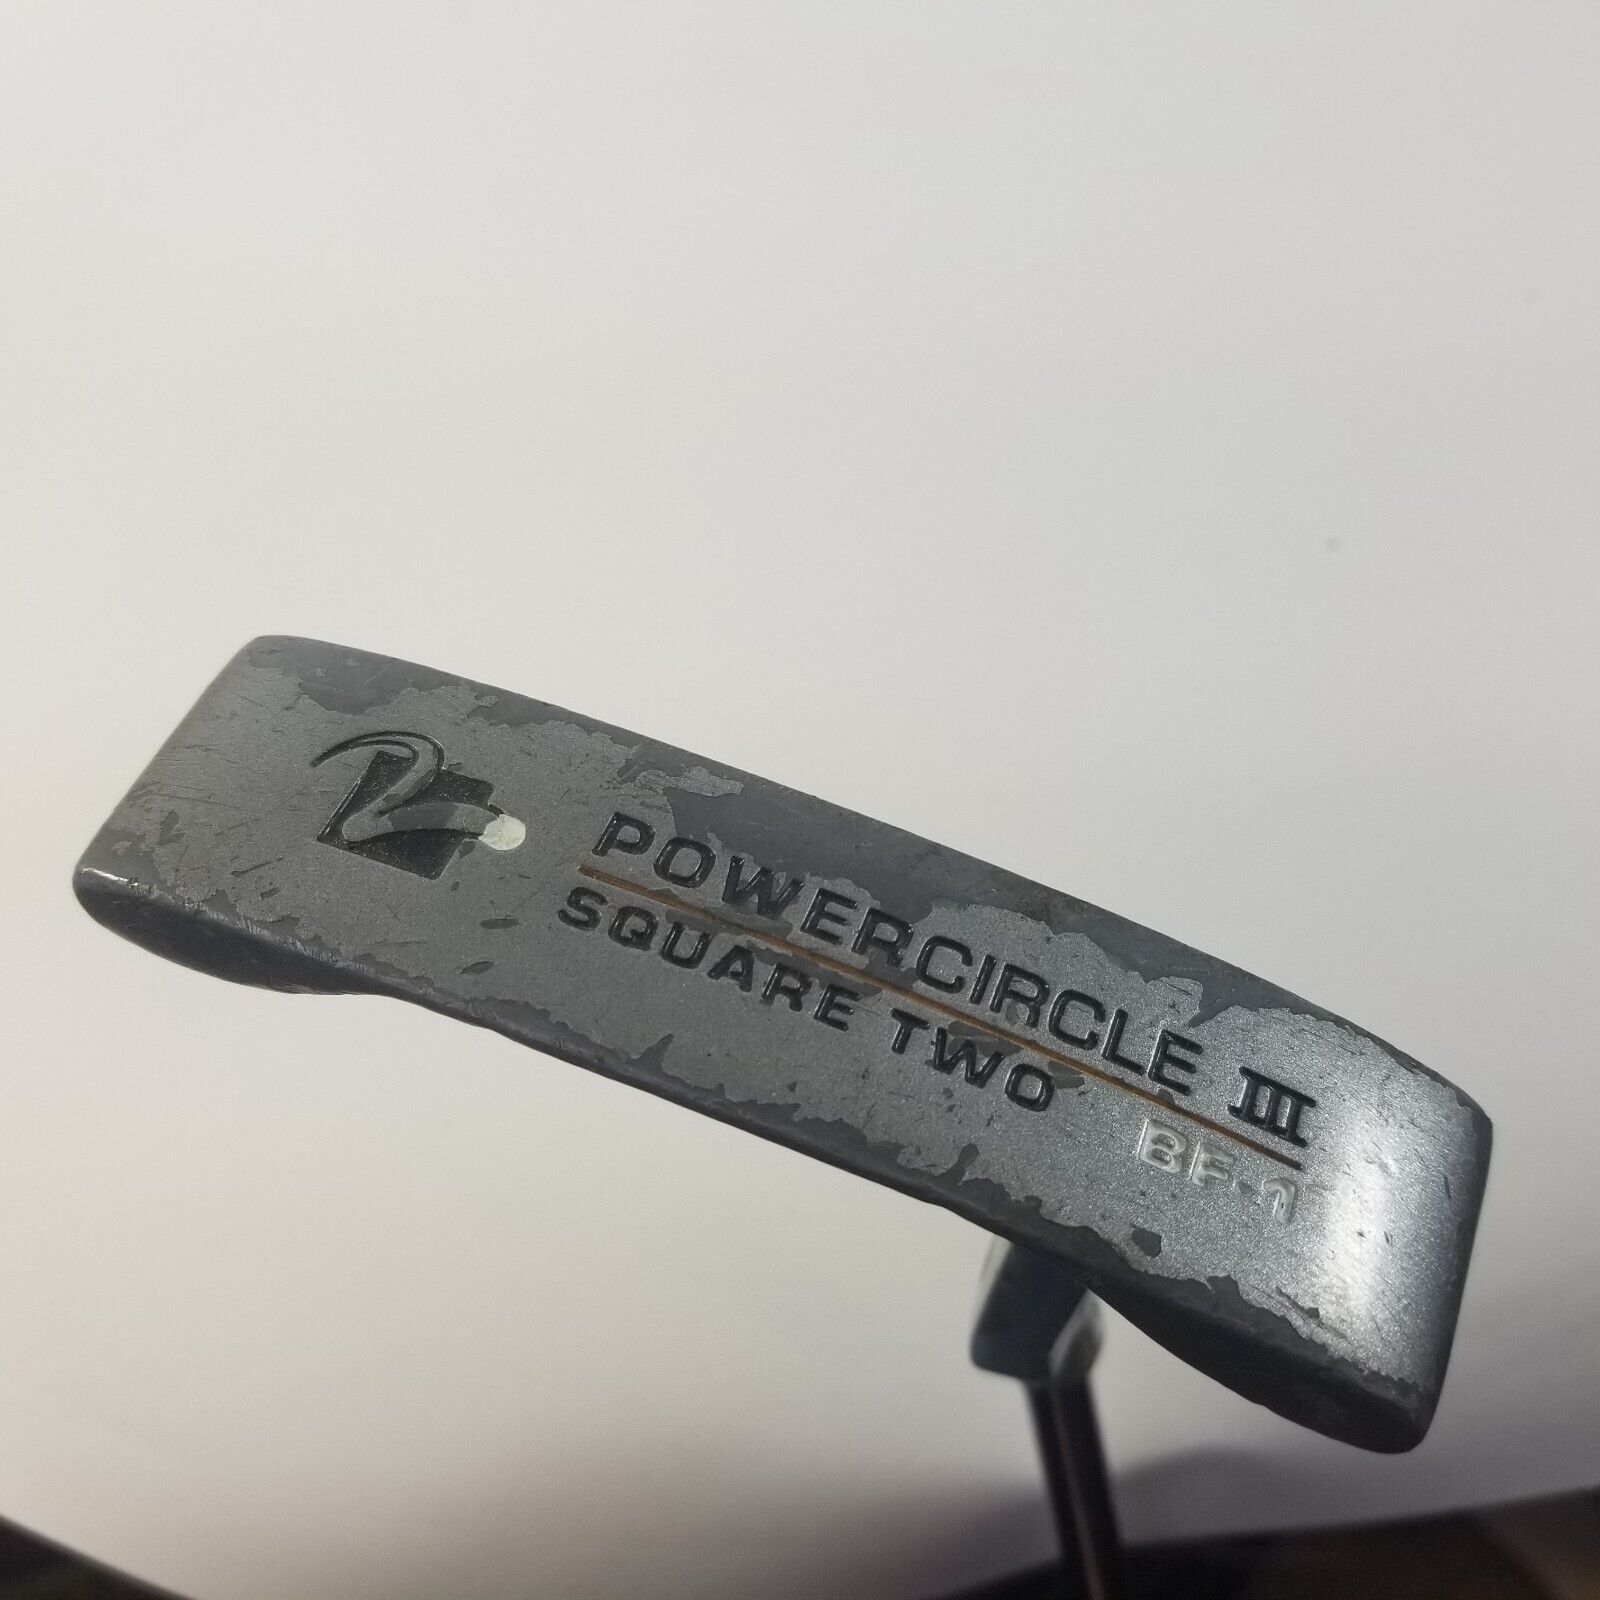 POWERCIRCLE III Square Two BF-1 Putter R Flex Steel Shaft Right Handed 35.5”